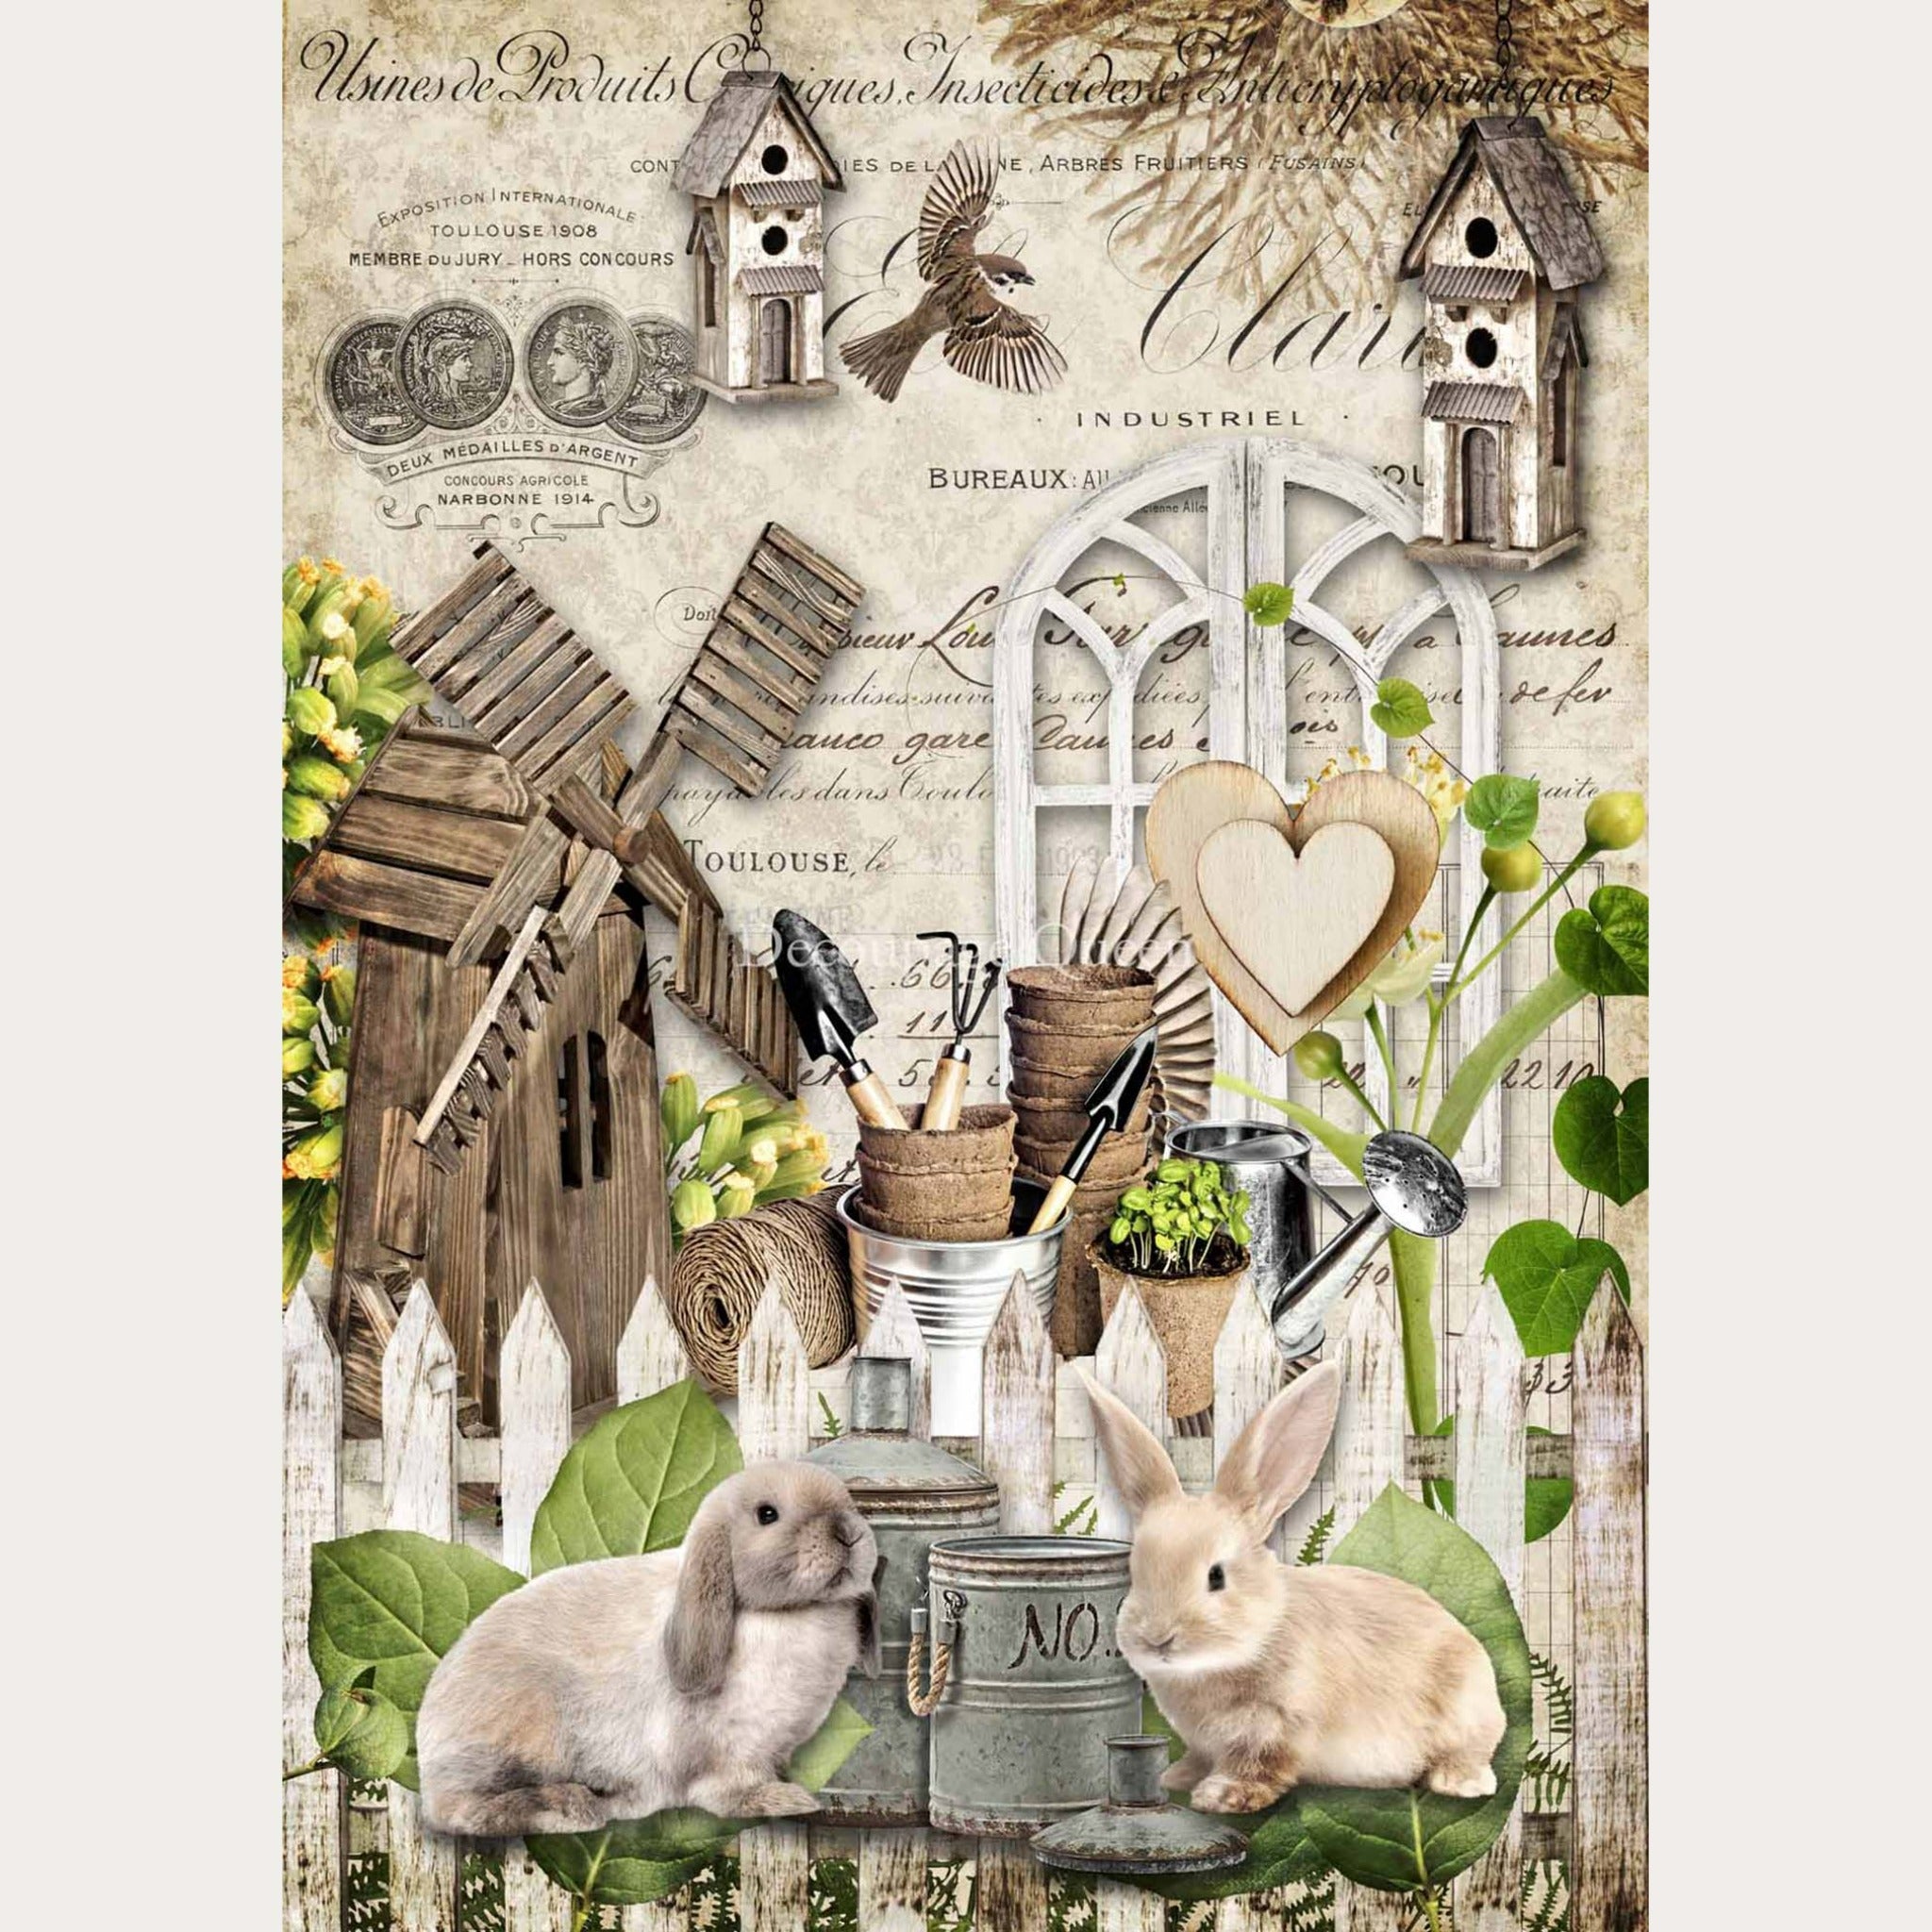 A3 rice paper design that features a collage of bunnies, bird houses, a wood windmill, and other garden accessories against a vintage parchment background. White borders are on the sides.